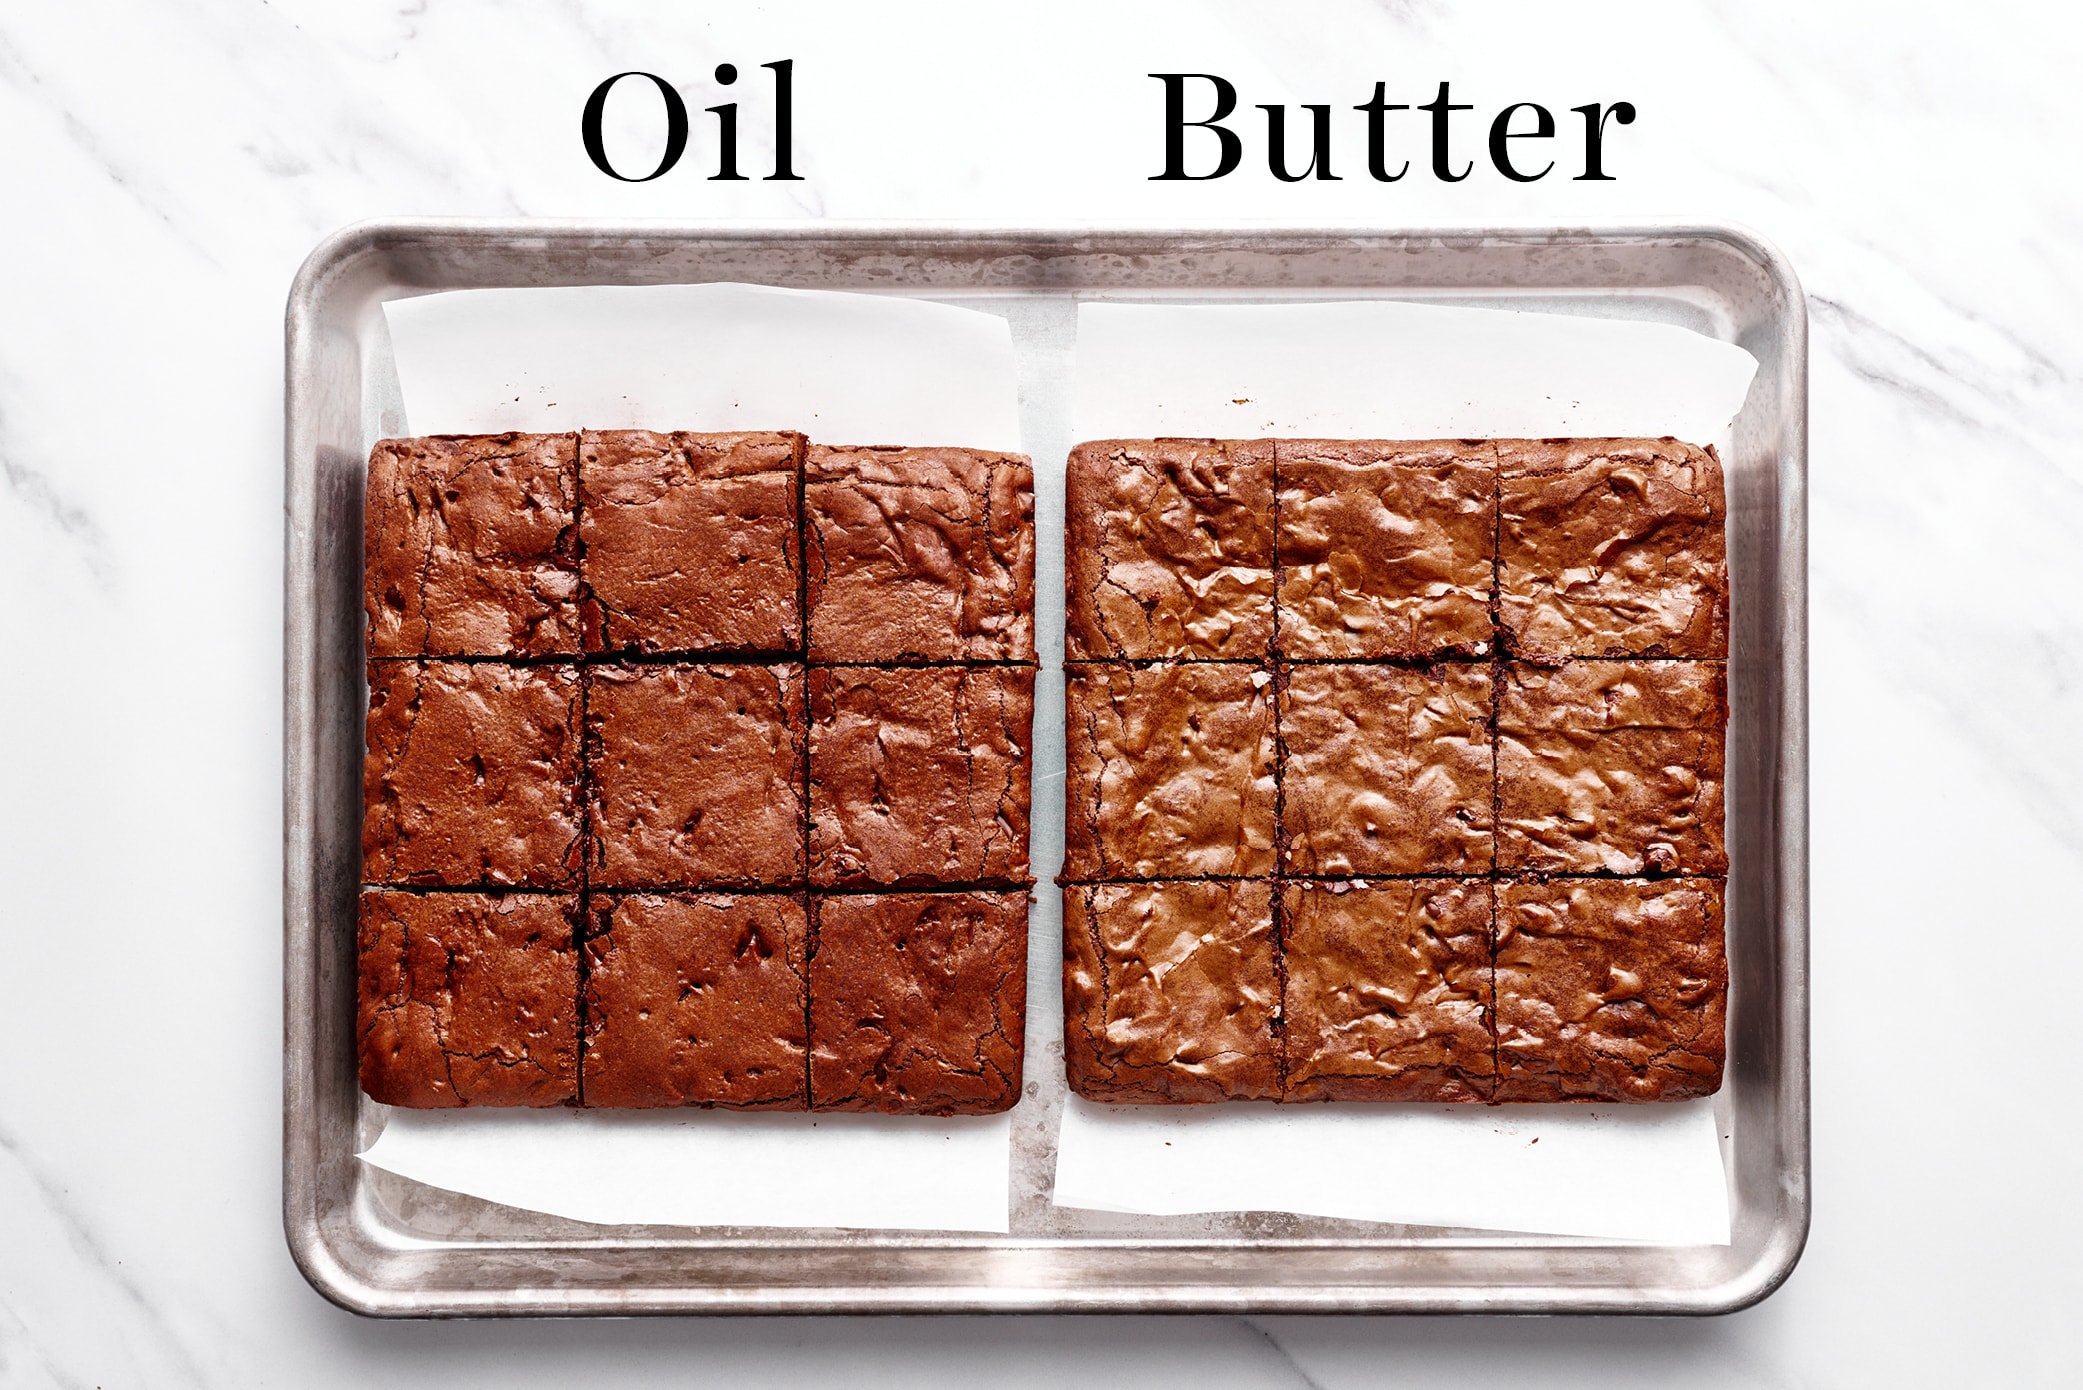 sliced brownies on a pan comparing whether oil or butter is better in baking